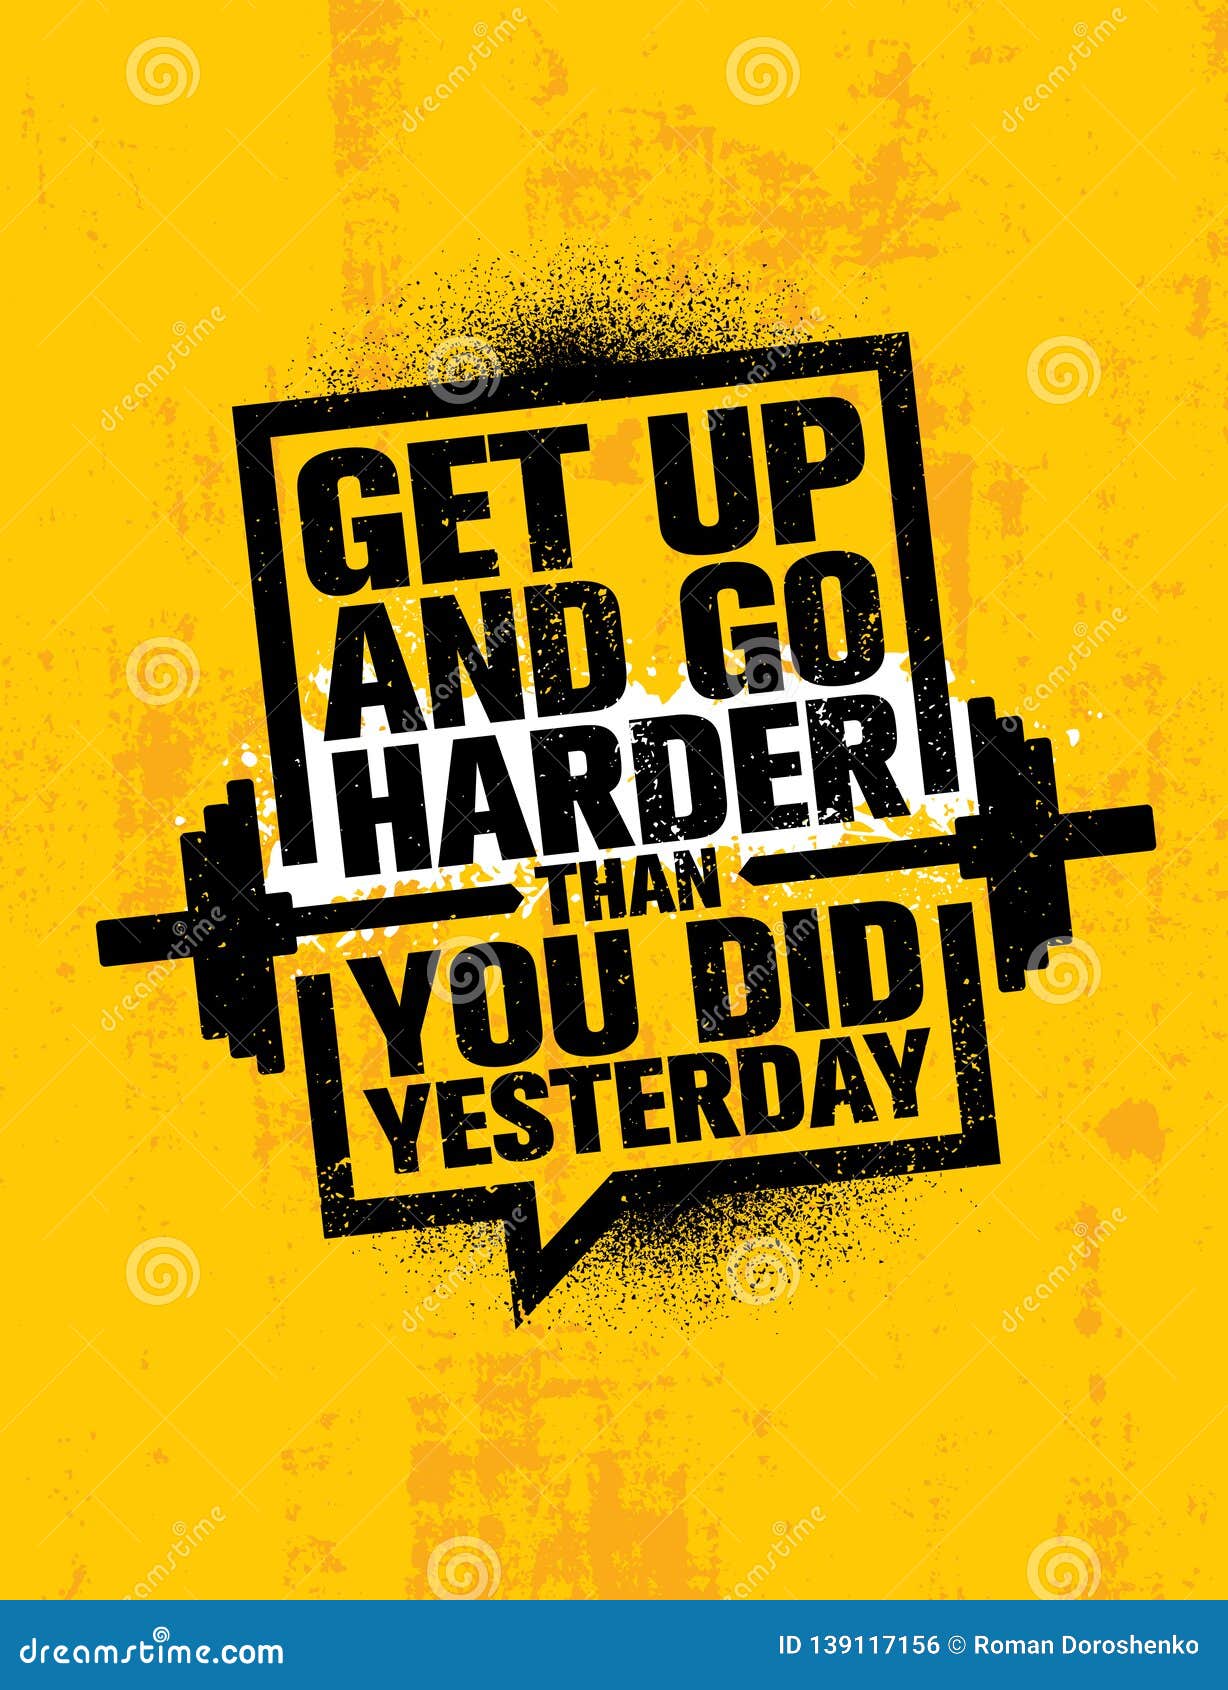 Get Up And Go Harder Than You Did Yesterday. Inspiring Workout And Fitness Gym Motivation Quote Illustration Sign. Stock Vector - Illustration Of Design, Concept: 139117156